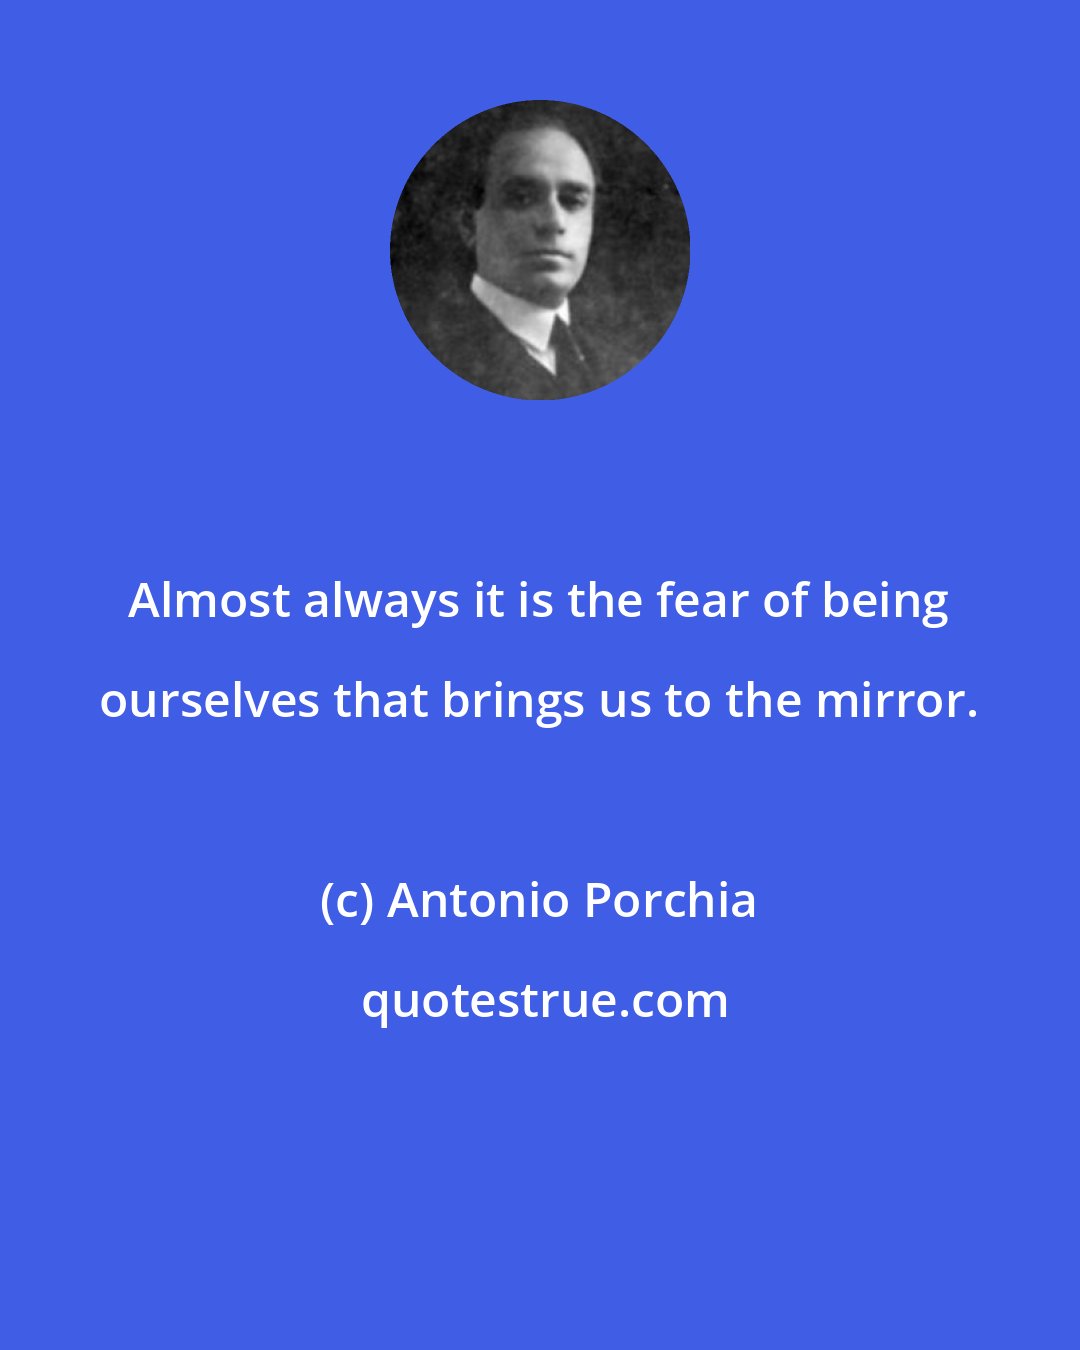 Antonio Porchia: Almost always it is the fear of being ourselves that brings us to the mirror.